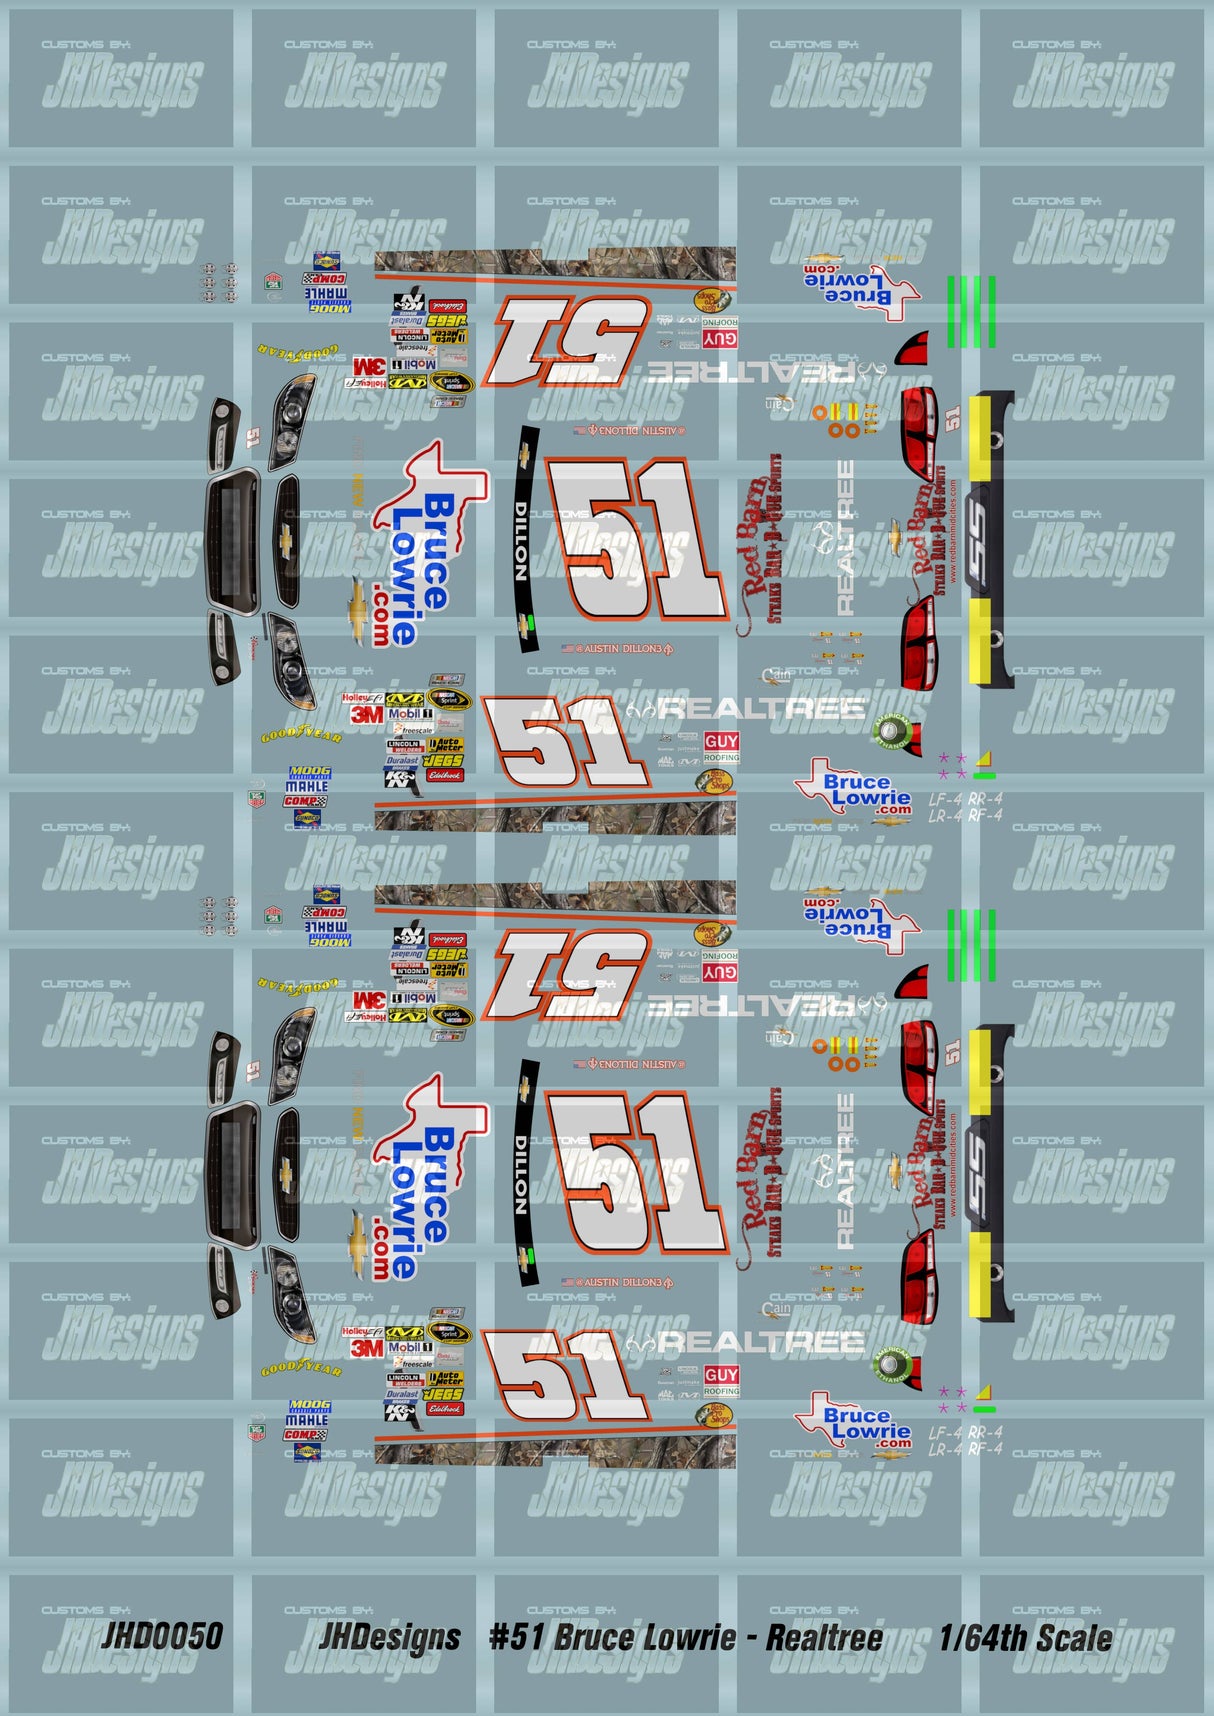 JH Designs Austin Dillon 2013 CUP #51 Bruce Lowrie Chevrolet - Realtree 1:64 Racecar Decal Set